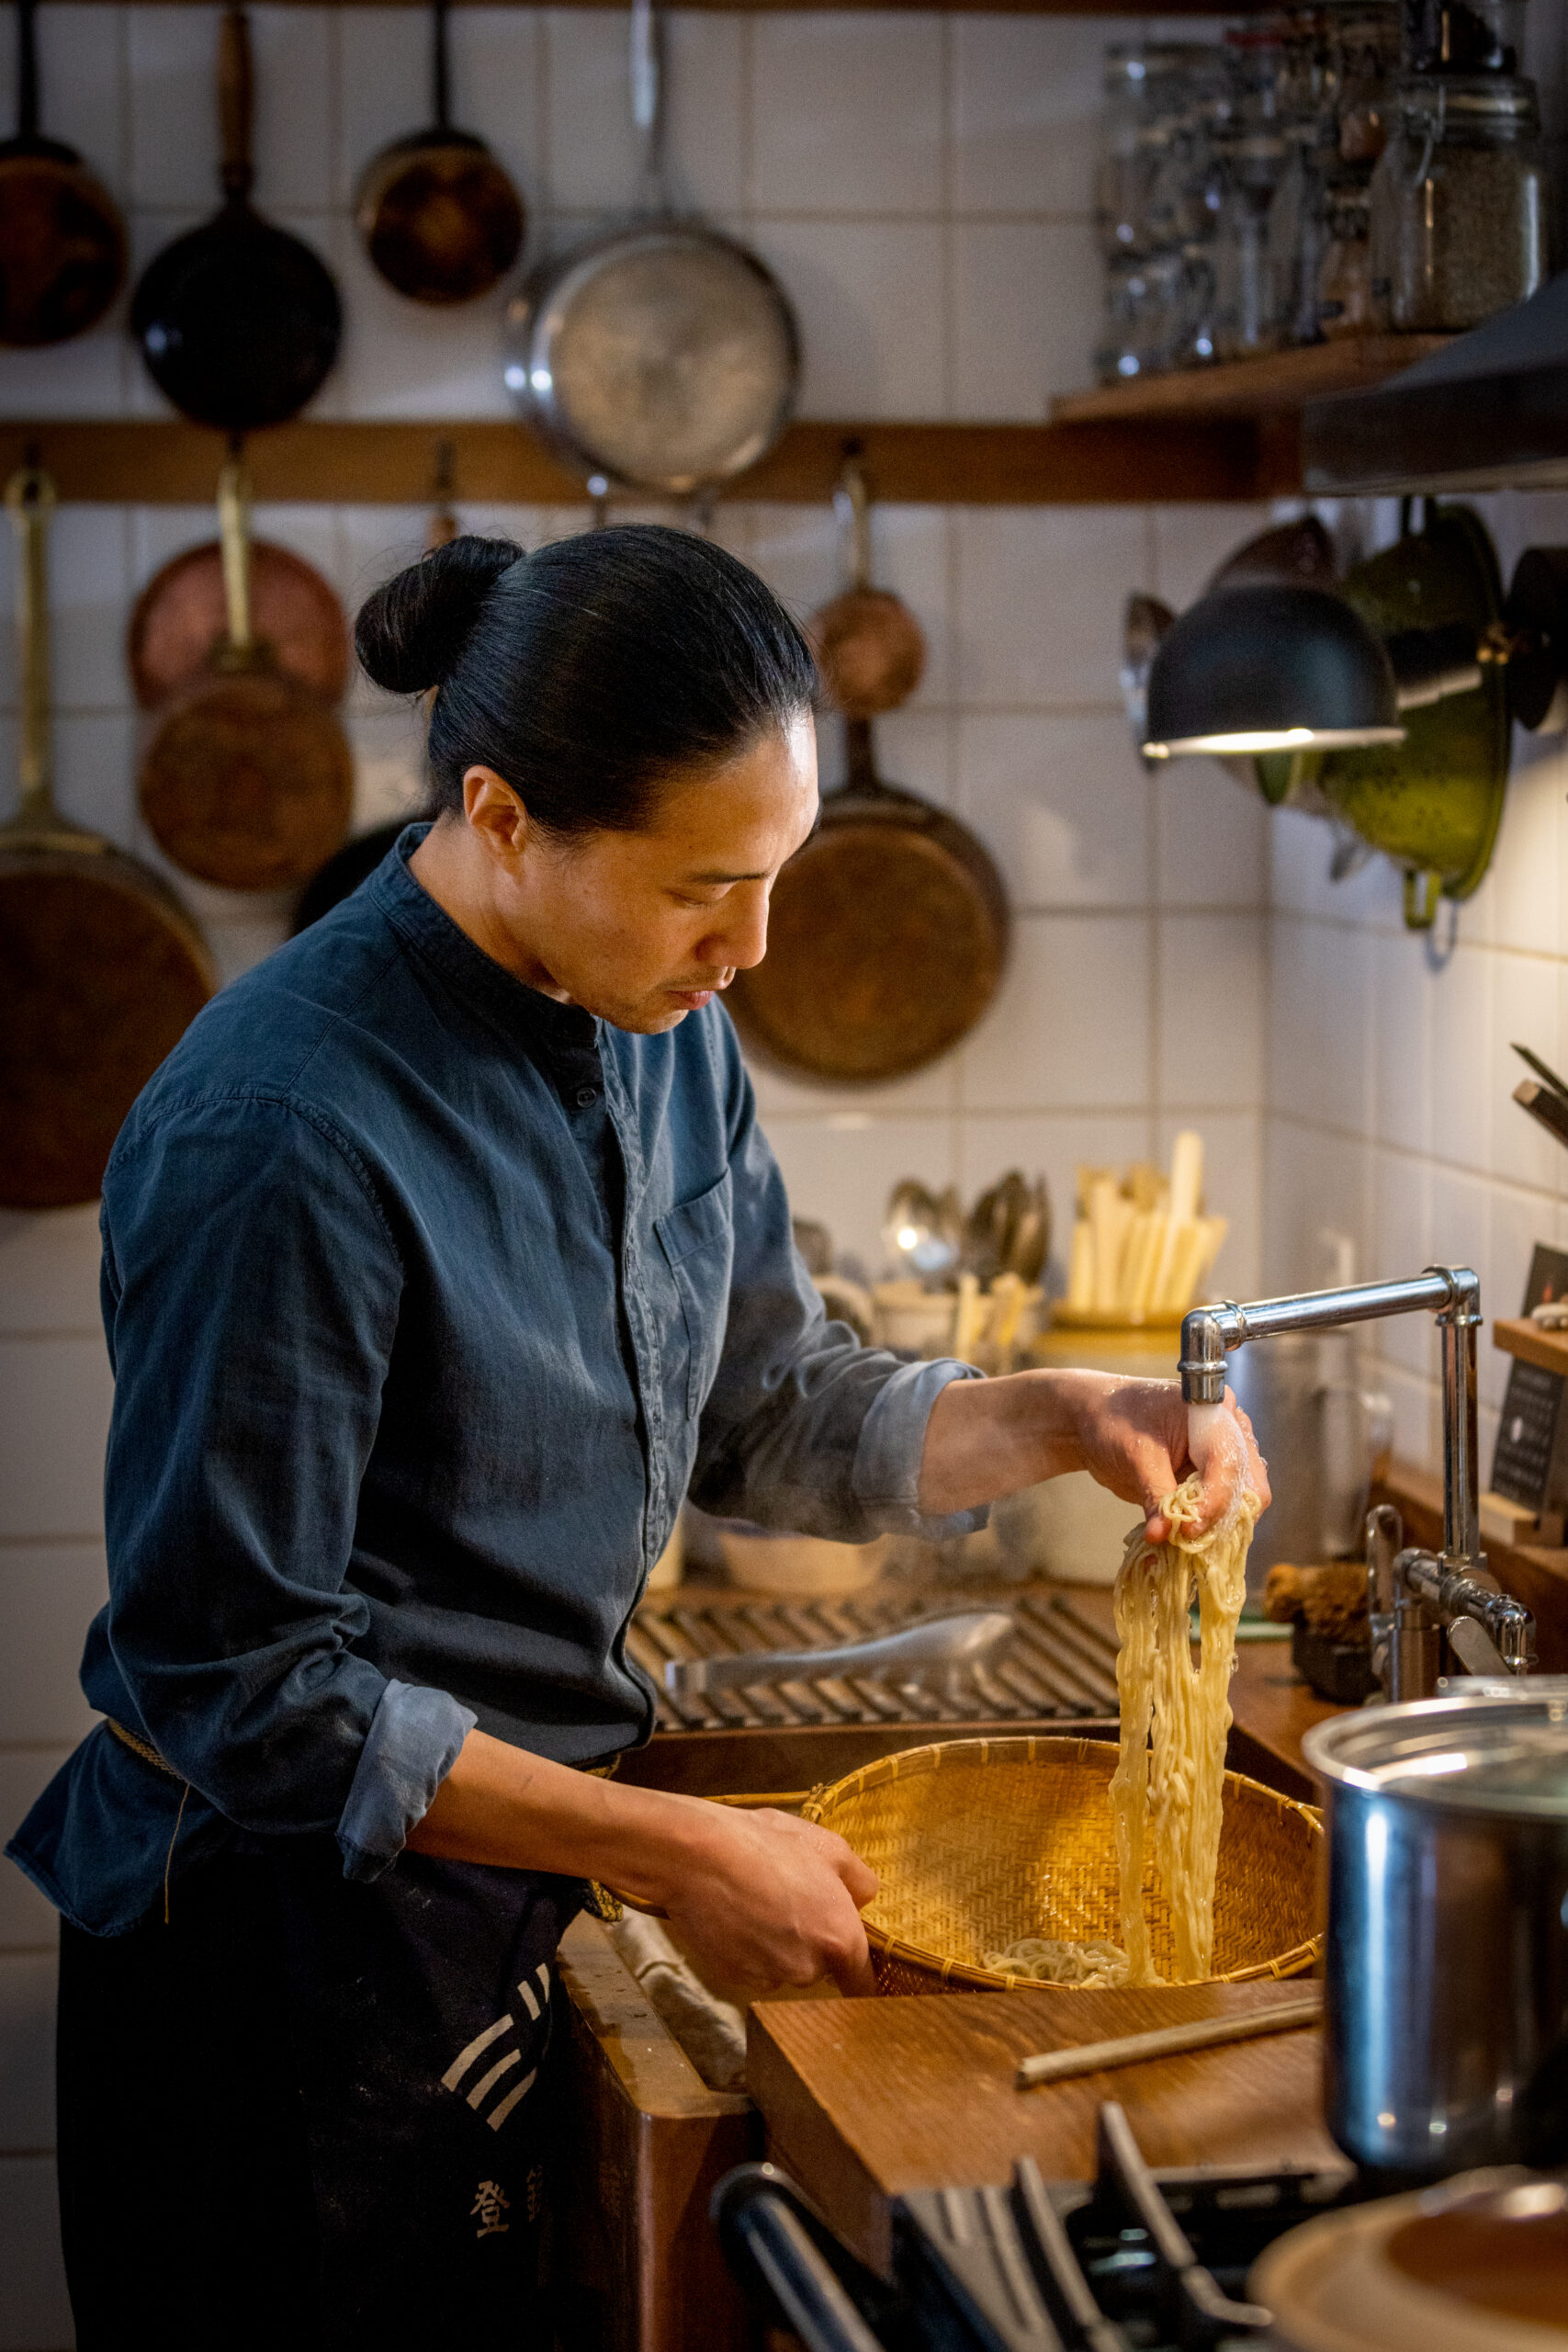 Chef Adrian Chang drains and separates the cooked noodles for his Lo Fong Tong with pork ribs and winter melon in his west county kitchen Thursday, November 10, 2022. (John Burgess/Sonoma Magazine)